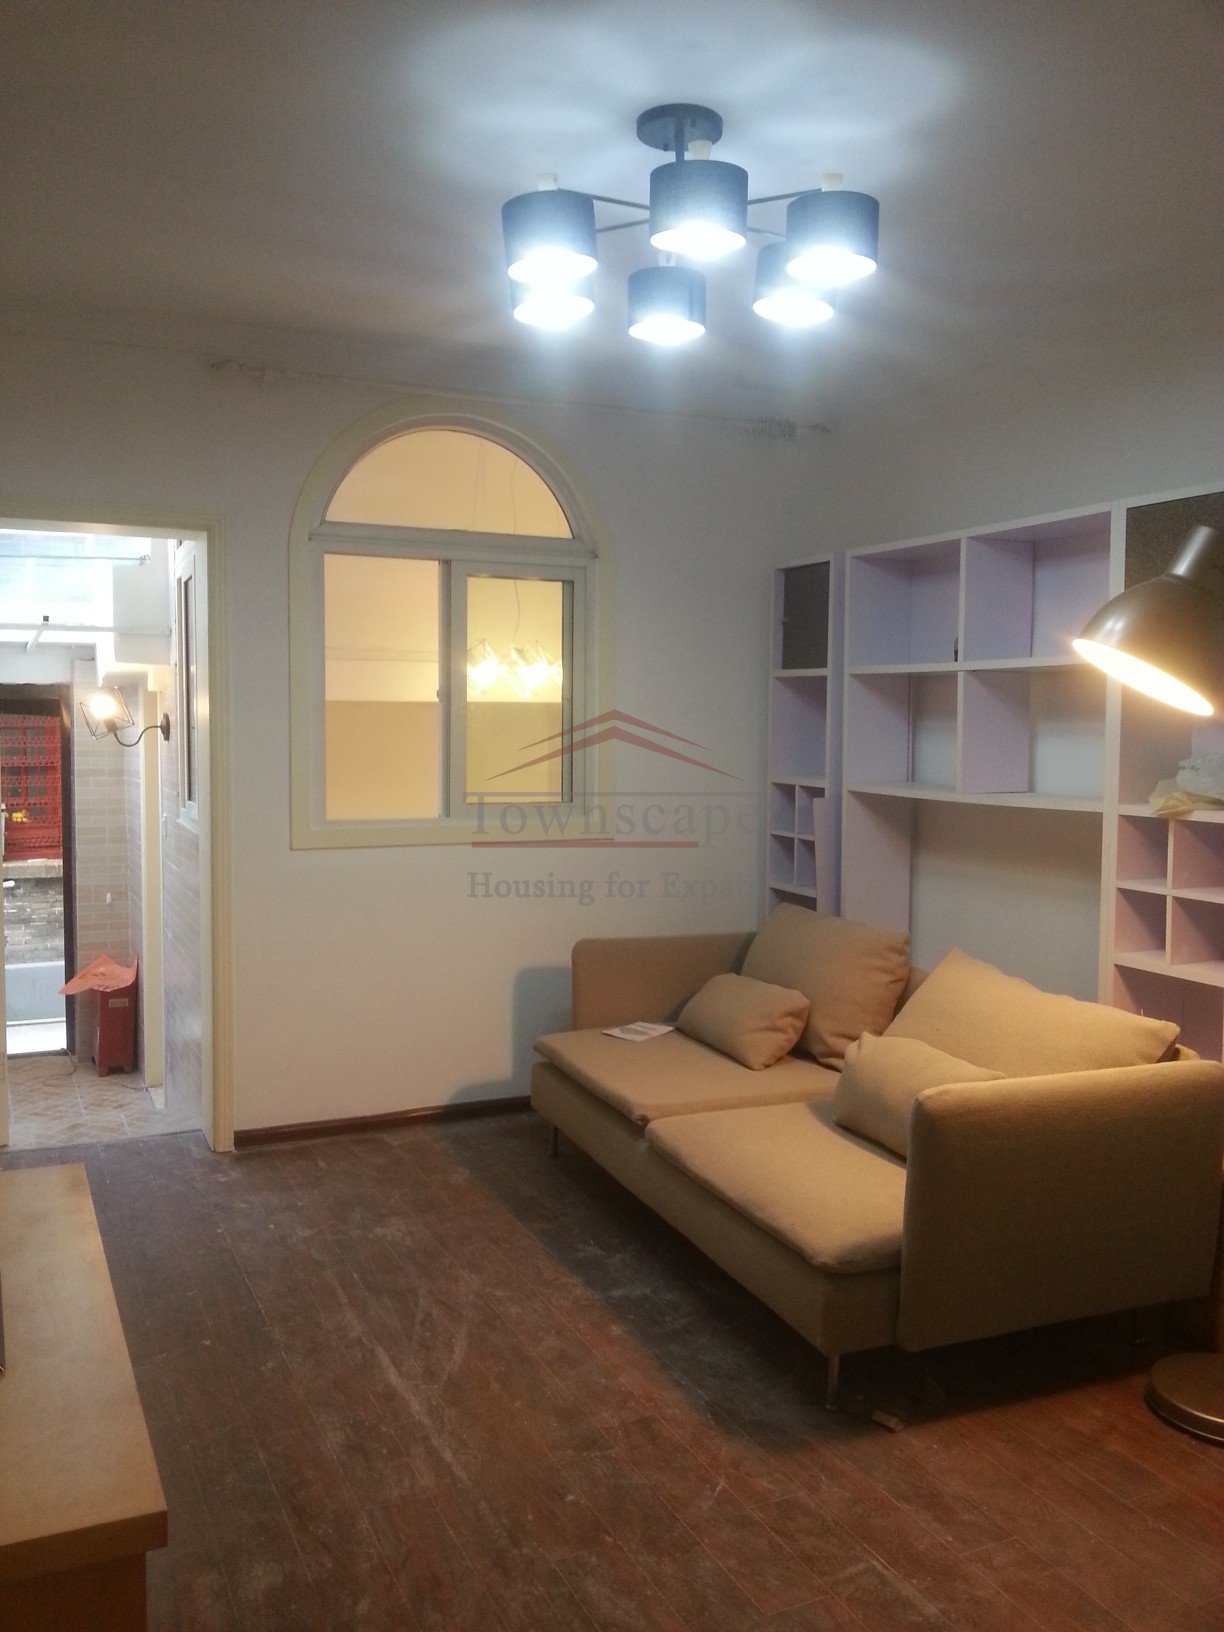 rent apartment in shanghai 1 Bedroom Lane House Apartment in great area line 1/10 Shanxi road